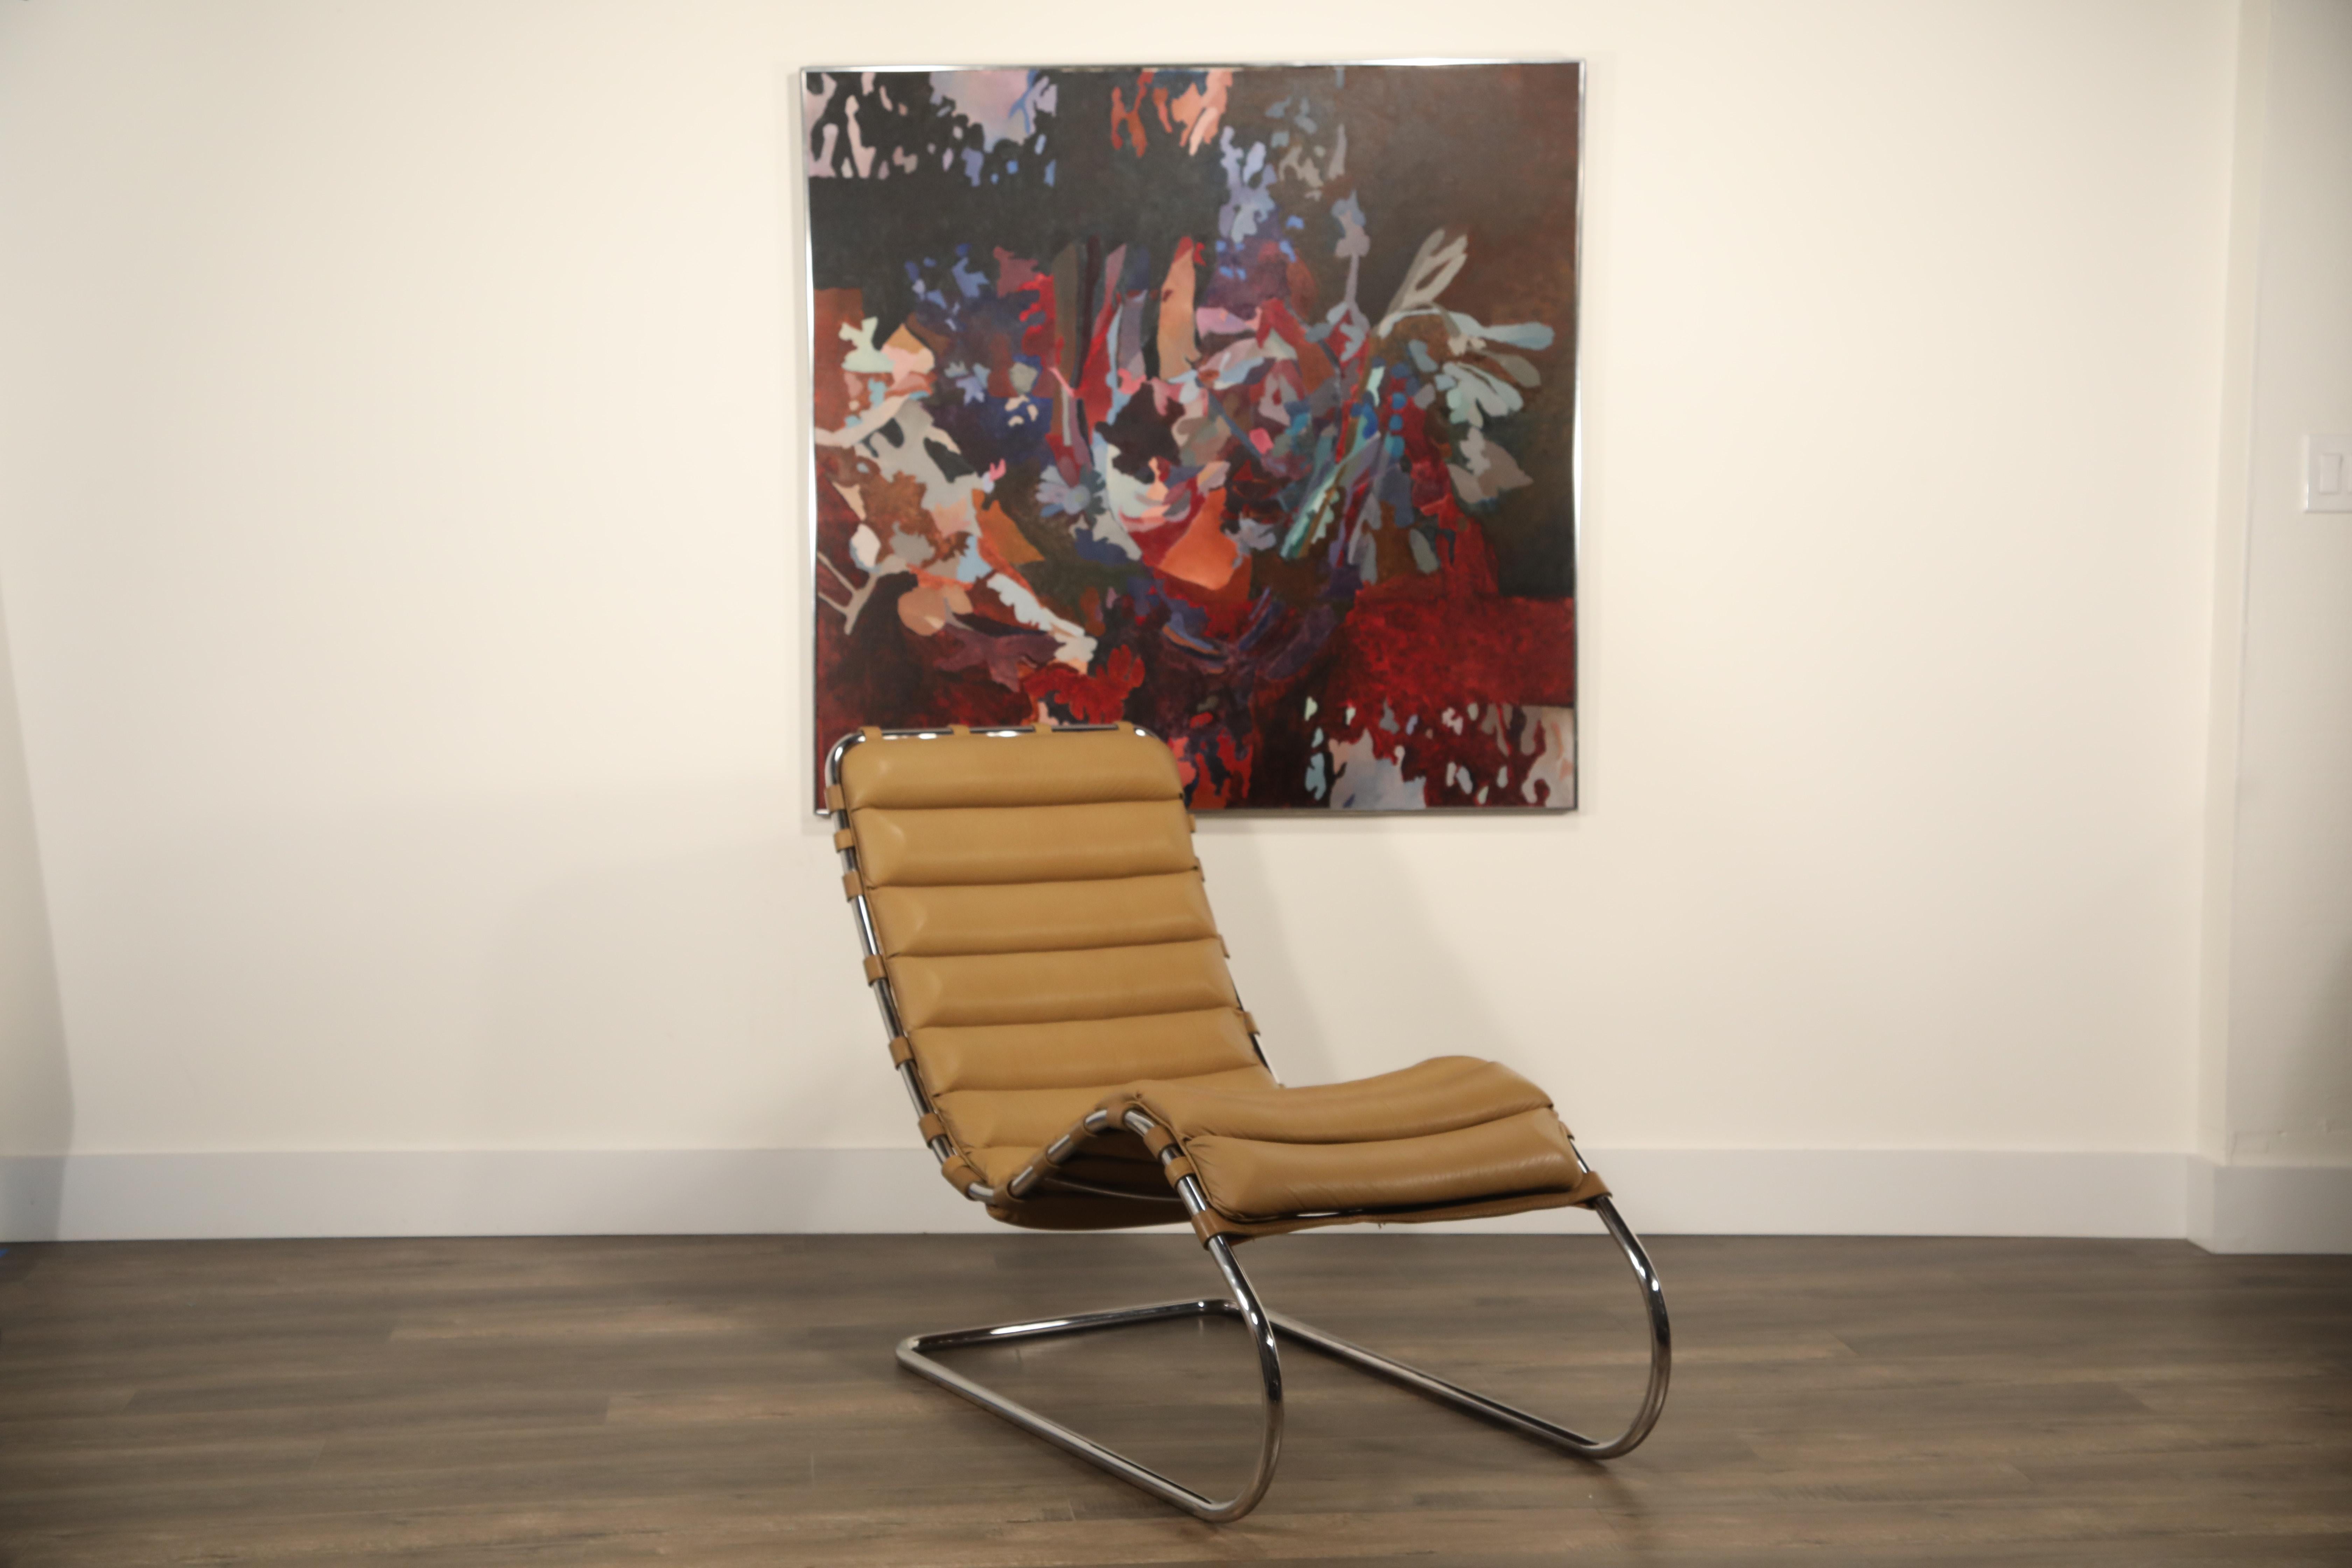 An incredible early production double-signed MR chaise lounge chair by Ludwig Mies van der Rohe for Knoll International, date stamped November 1978 production, possessing its original Knoll International tags to the leather seat cushions and date